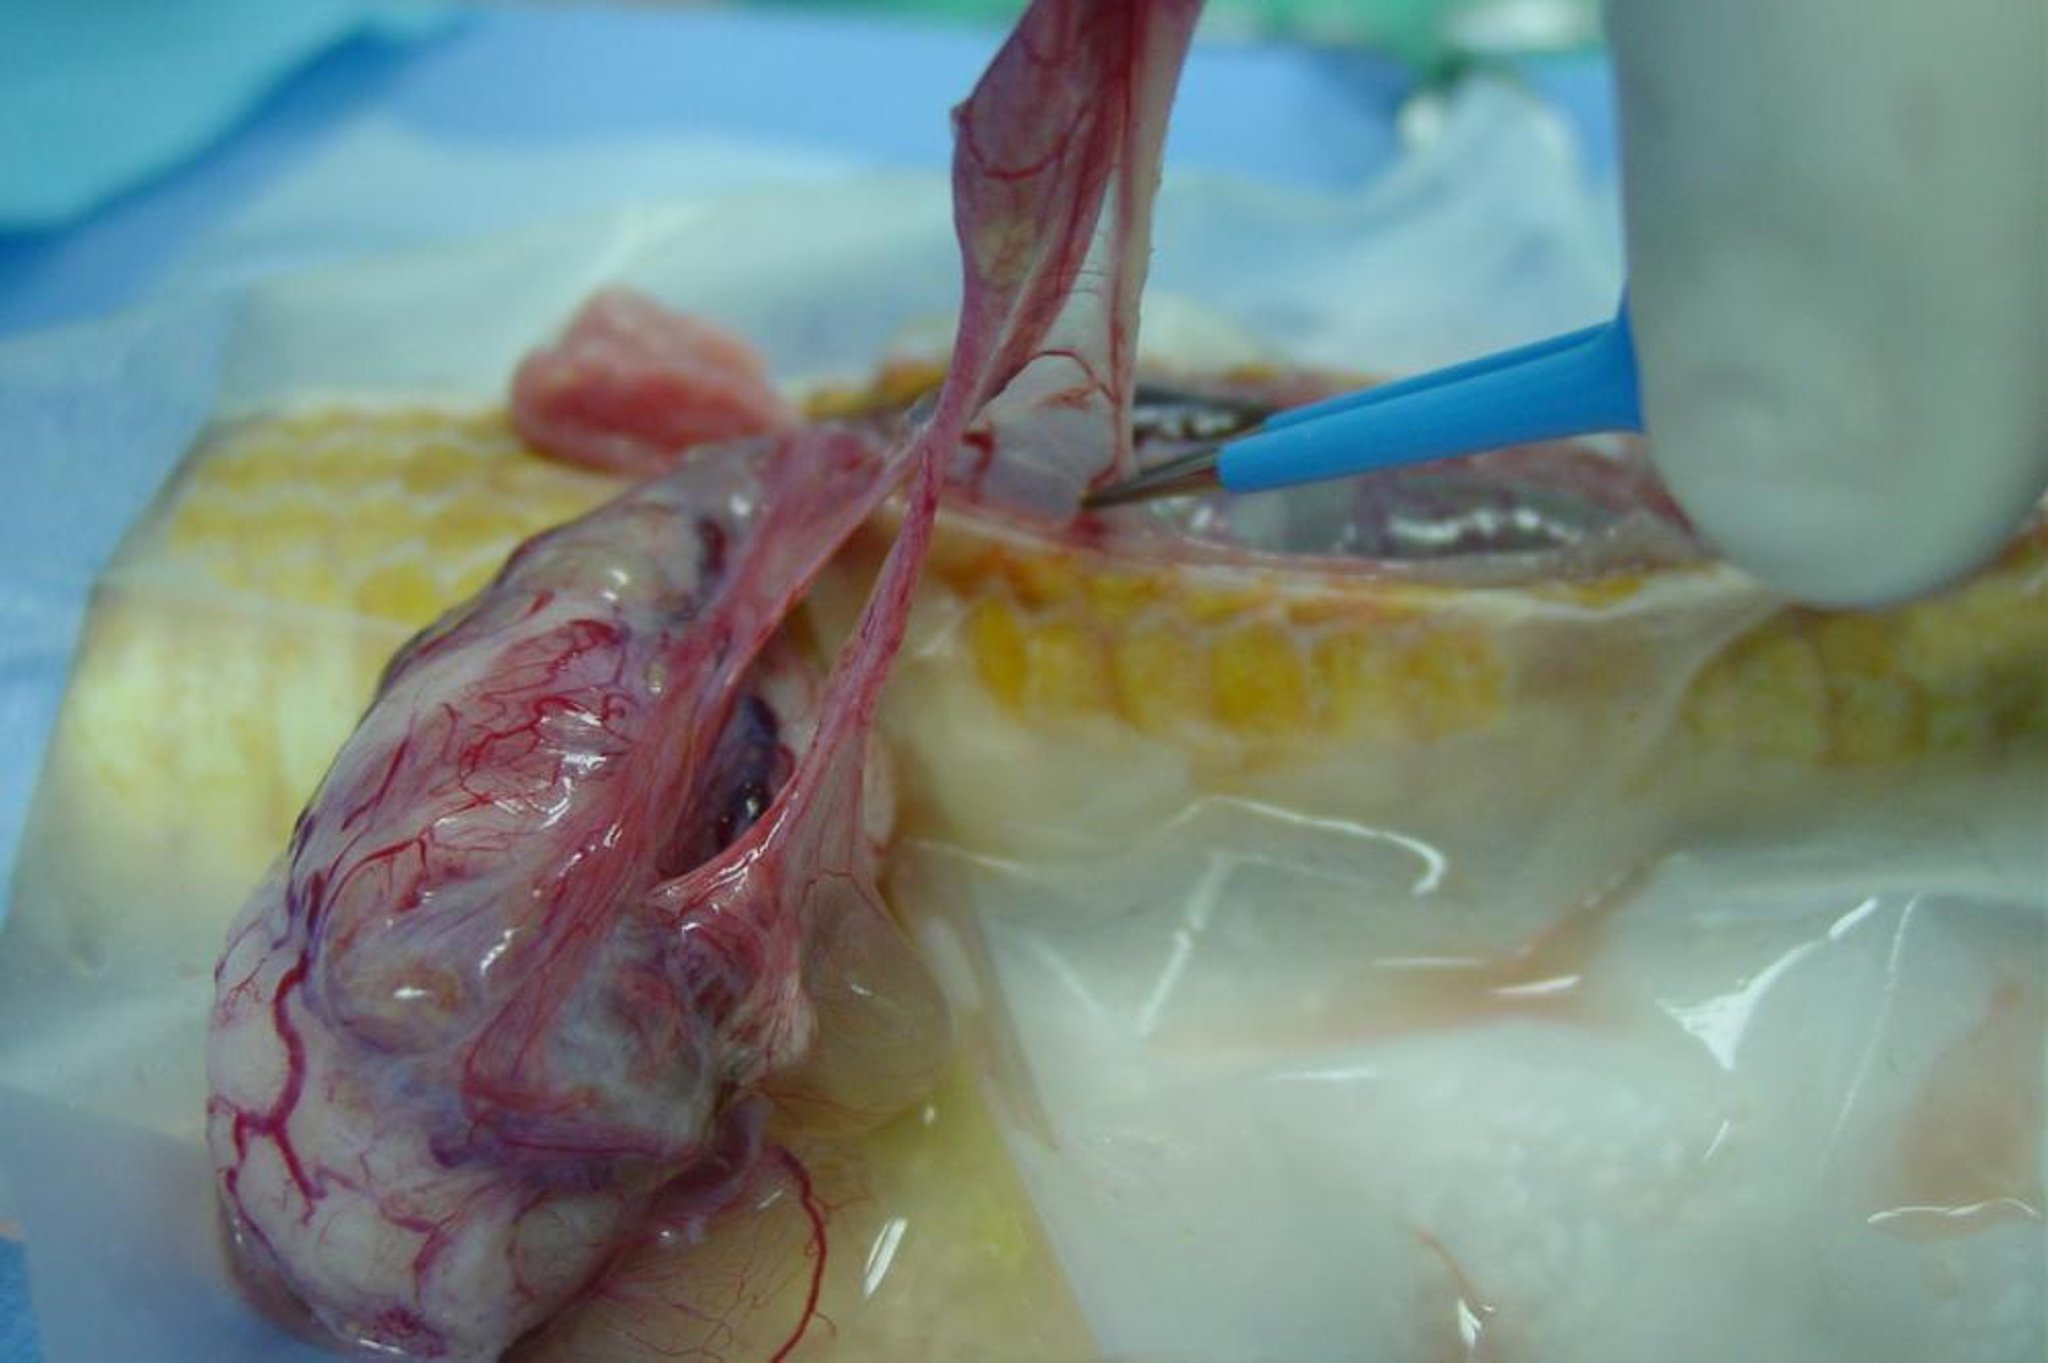 Surgical removal of ovarian granulosa cell tumor, corn snake